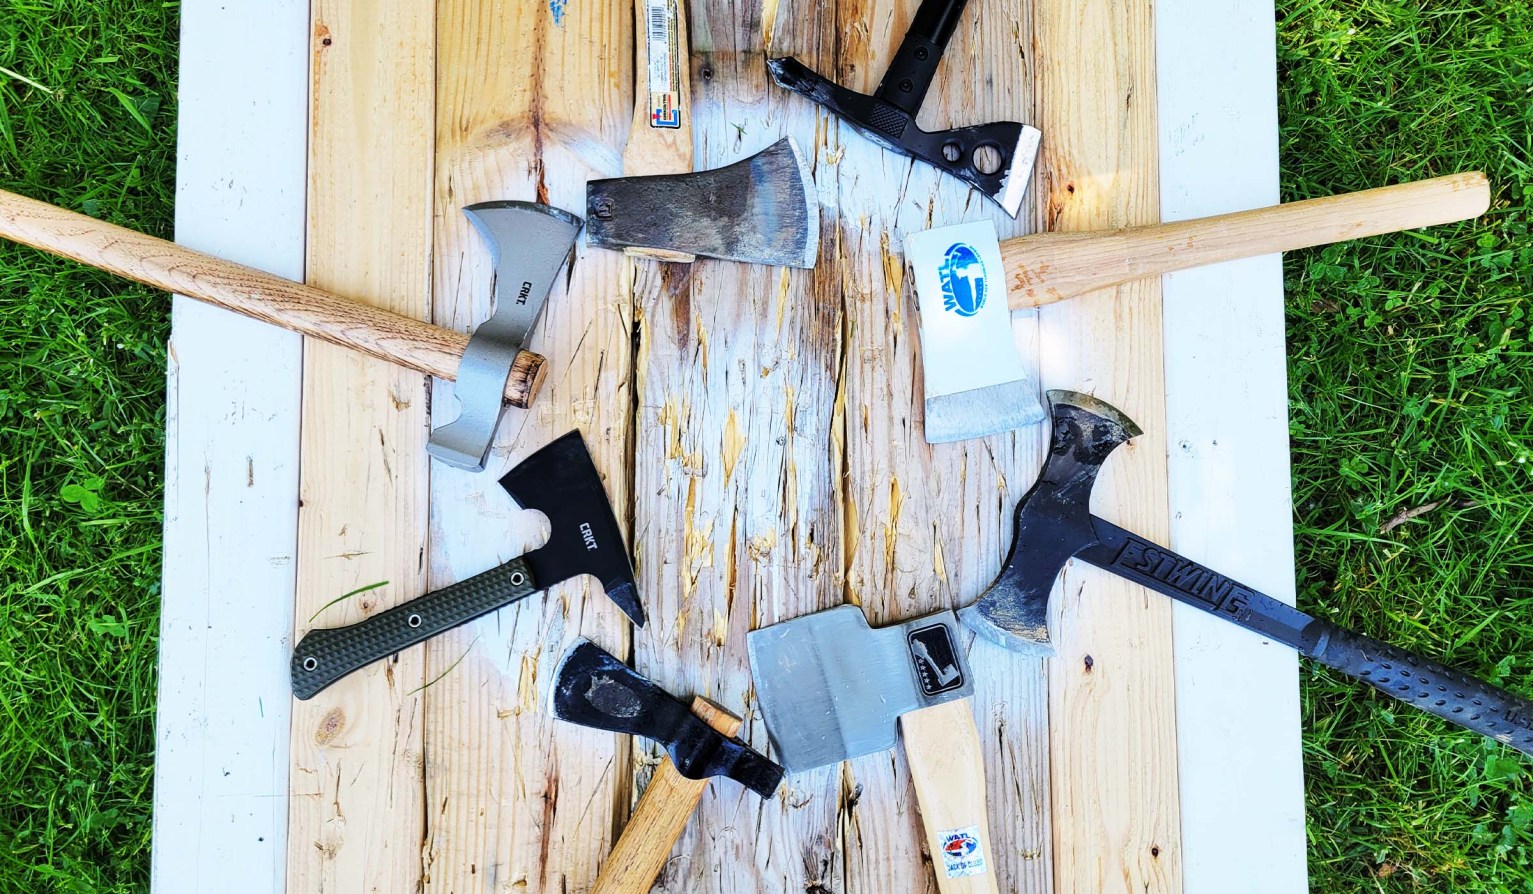 The best throwing axes were tested by a group of testers.